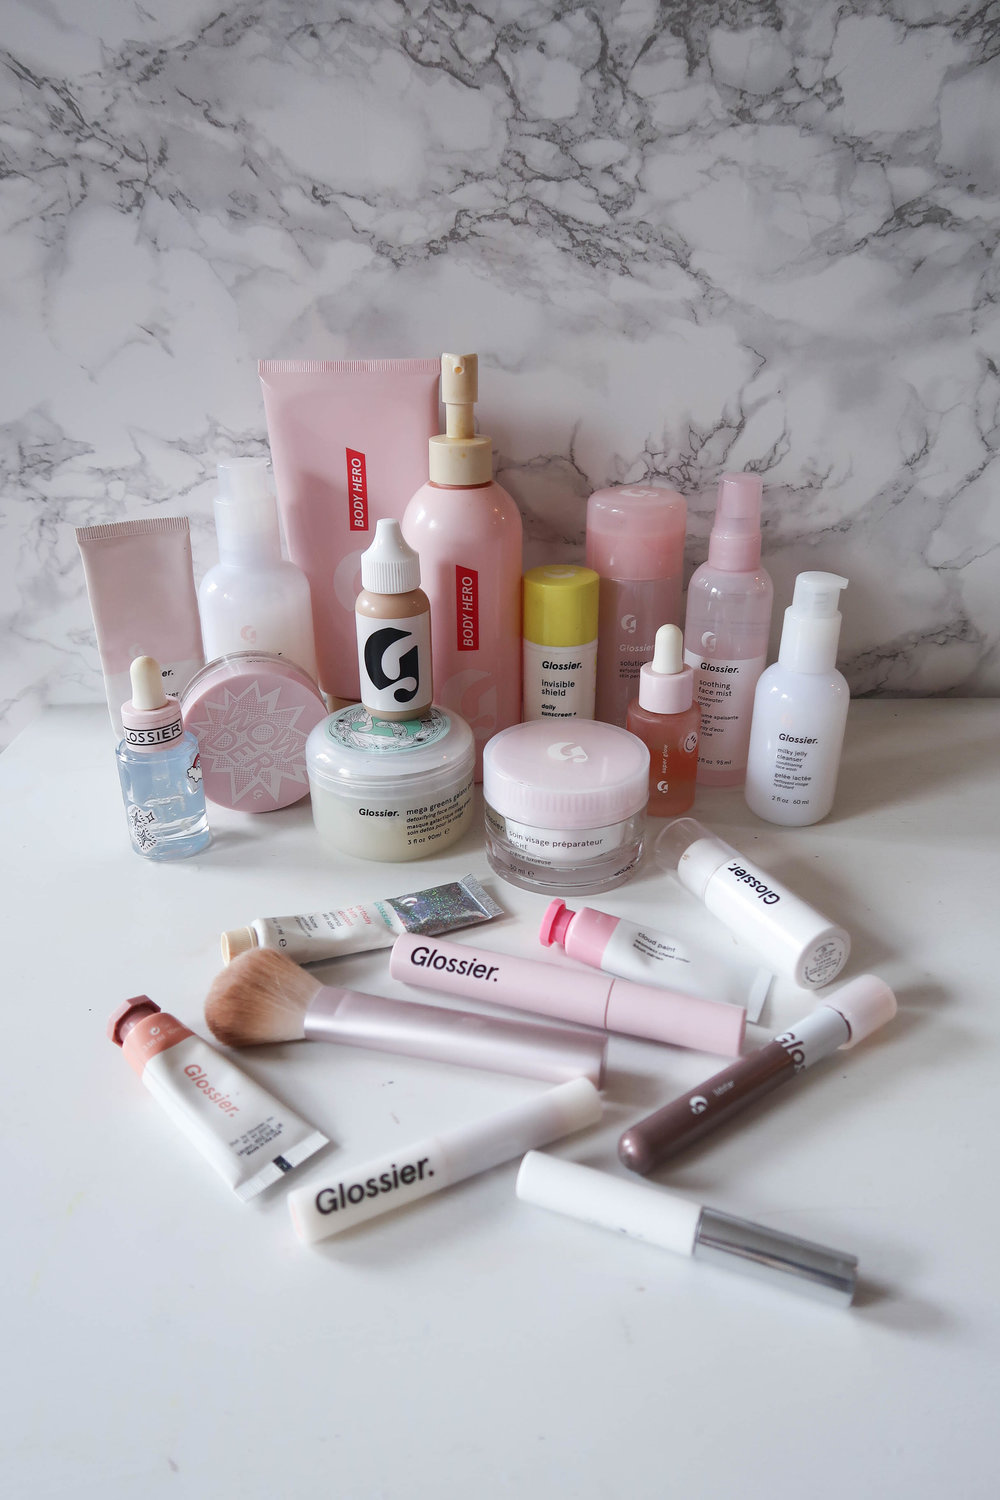 Glossier Turns 4: Sharing My All-Time Favorite Posts and Products